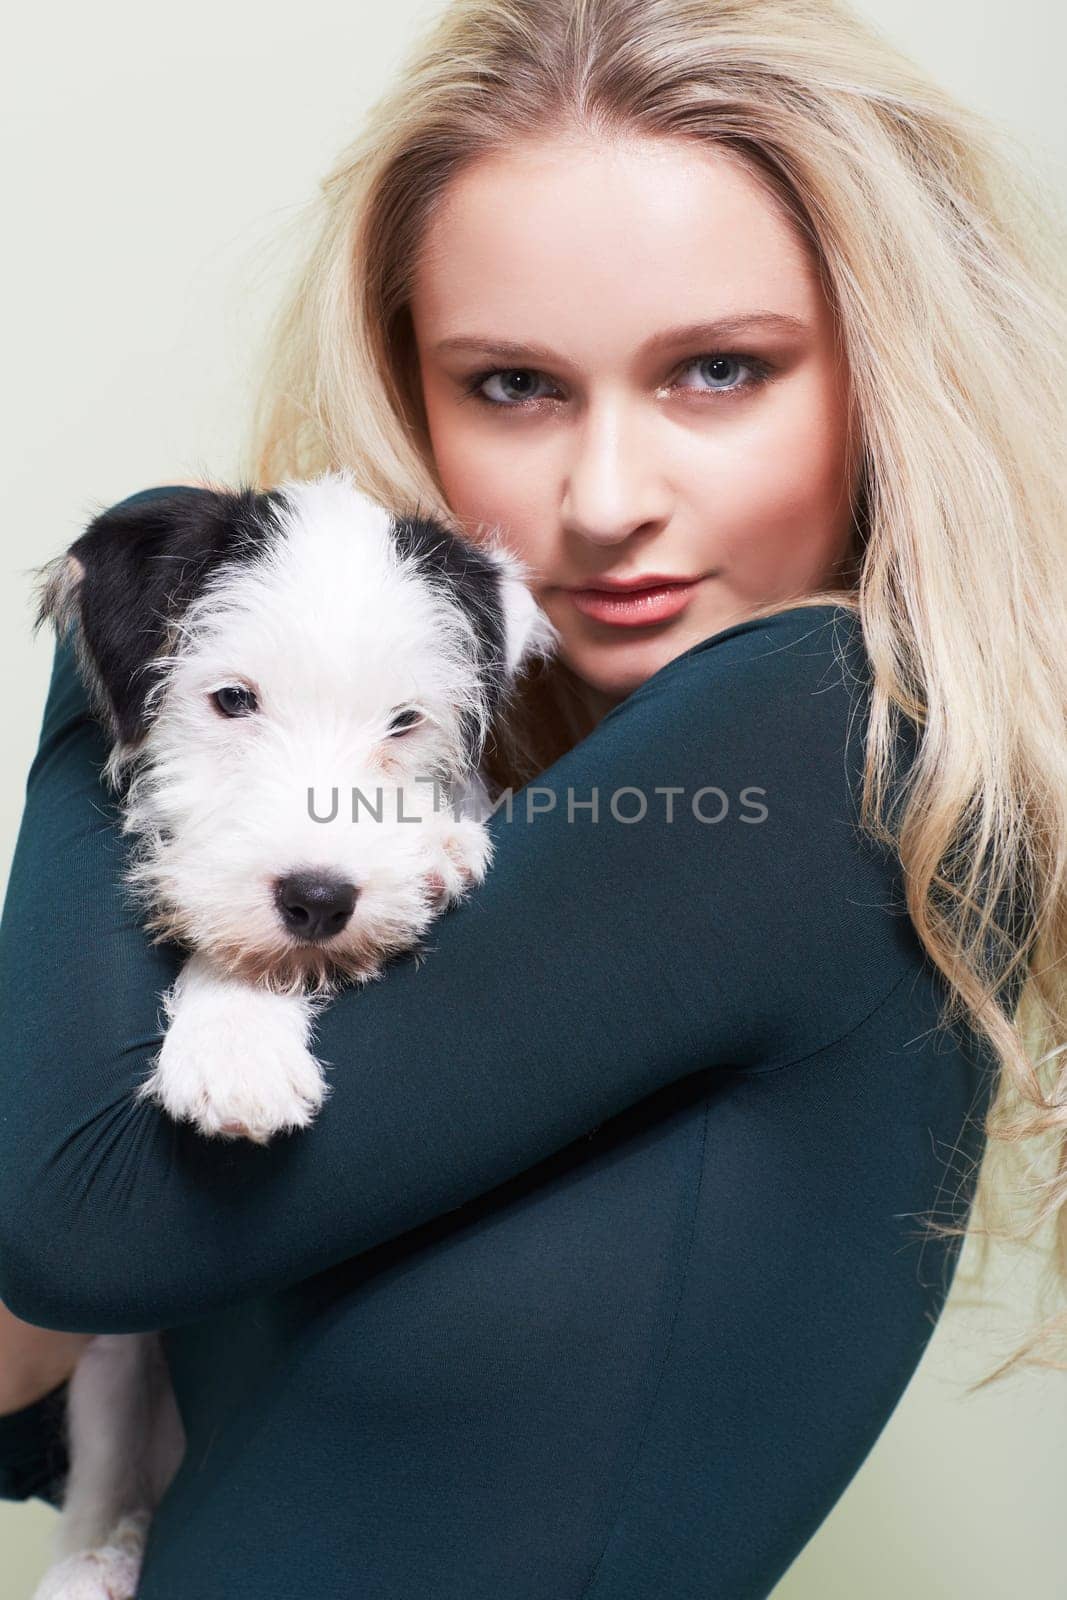 Portrait, hug and woman with a dog in her home with love, care and bonding, trust and chilling together. Puppy, love and face of female person embracing Jackapoo pet in house with support or security.